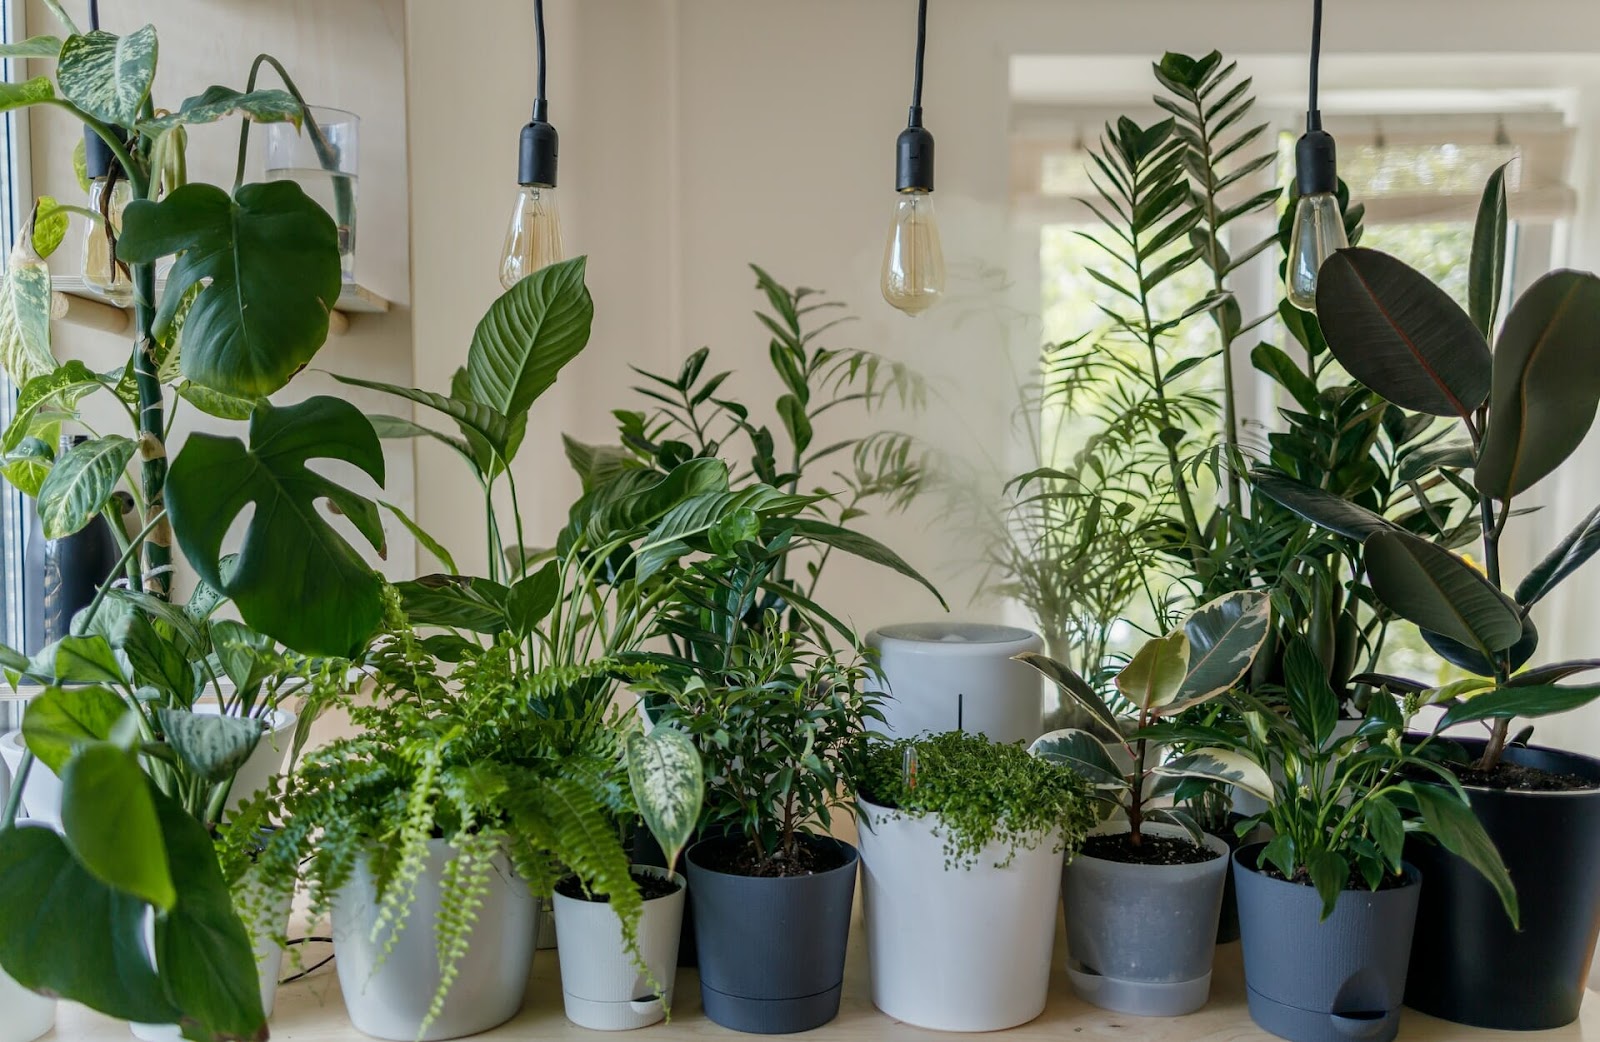 Hide Portable AC By Using Indoor Plants